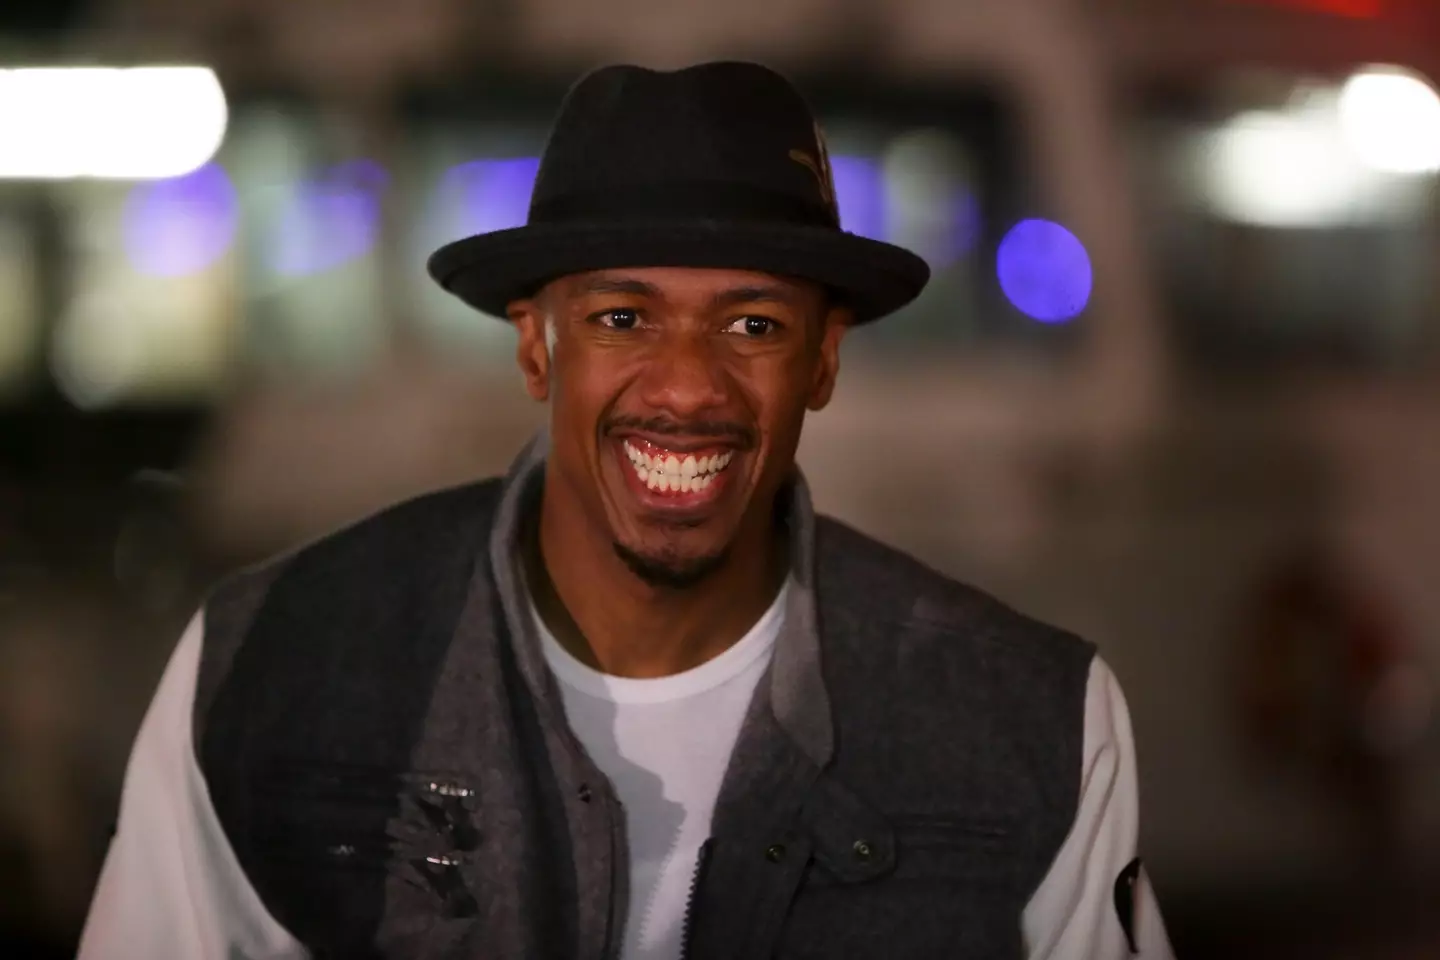 Nick Cannon has teased his thirteenth baby may be on the way.